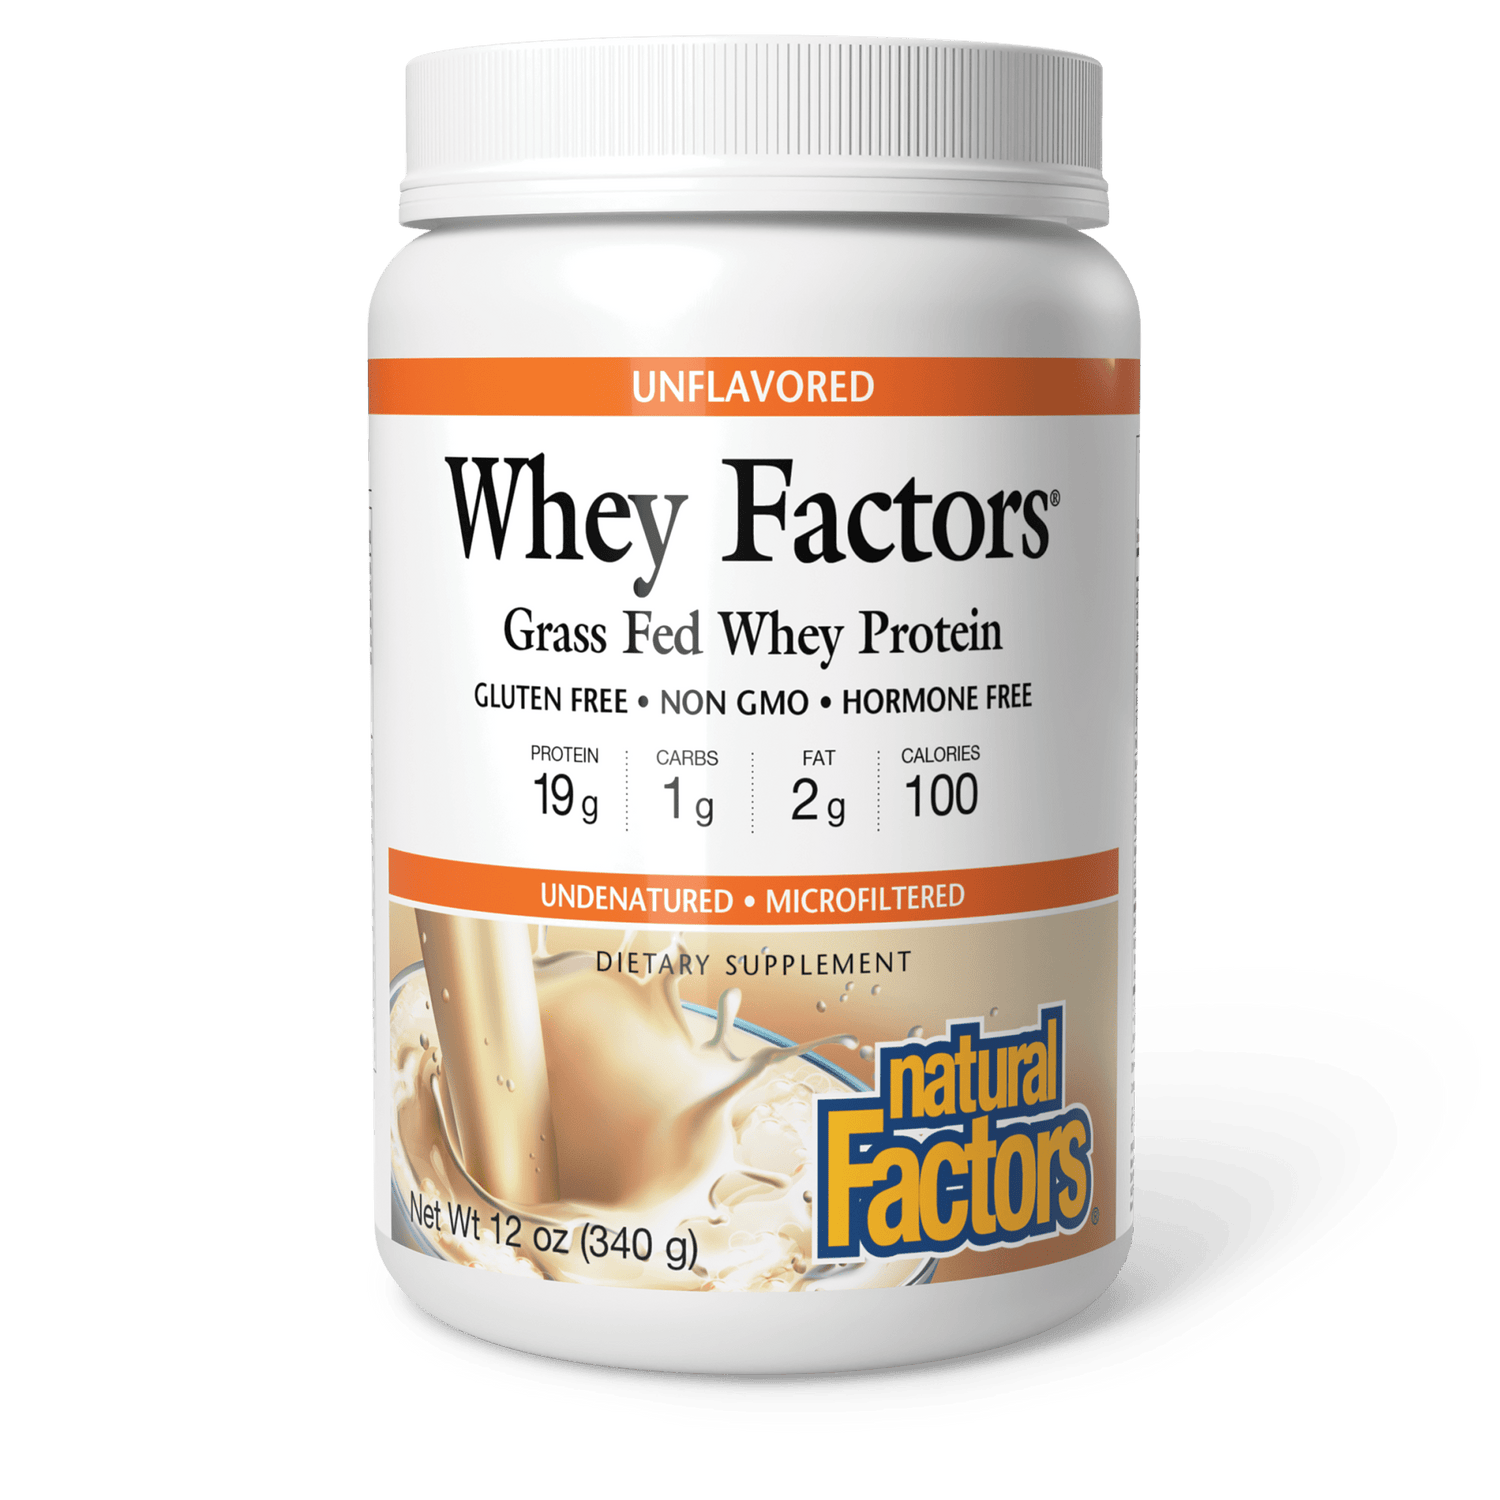 Grass Fed Whey Protein Unflavored